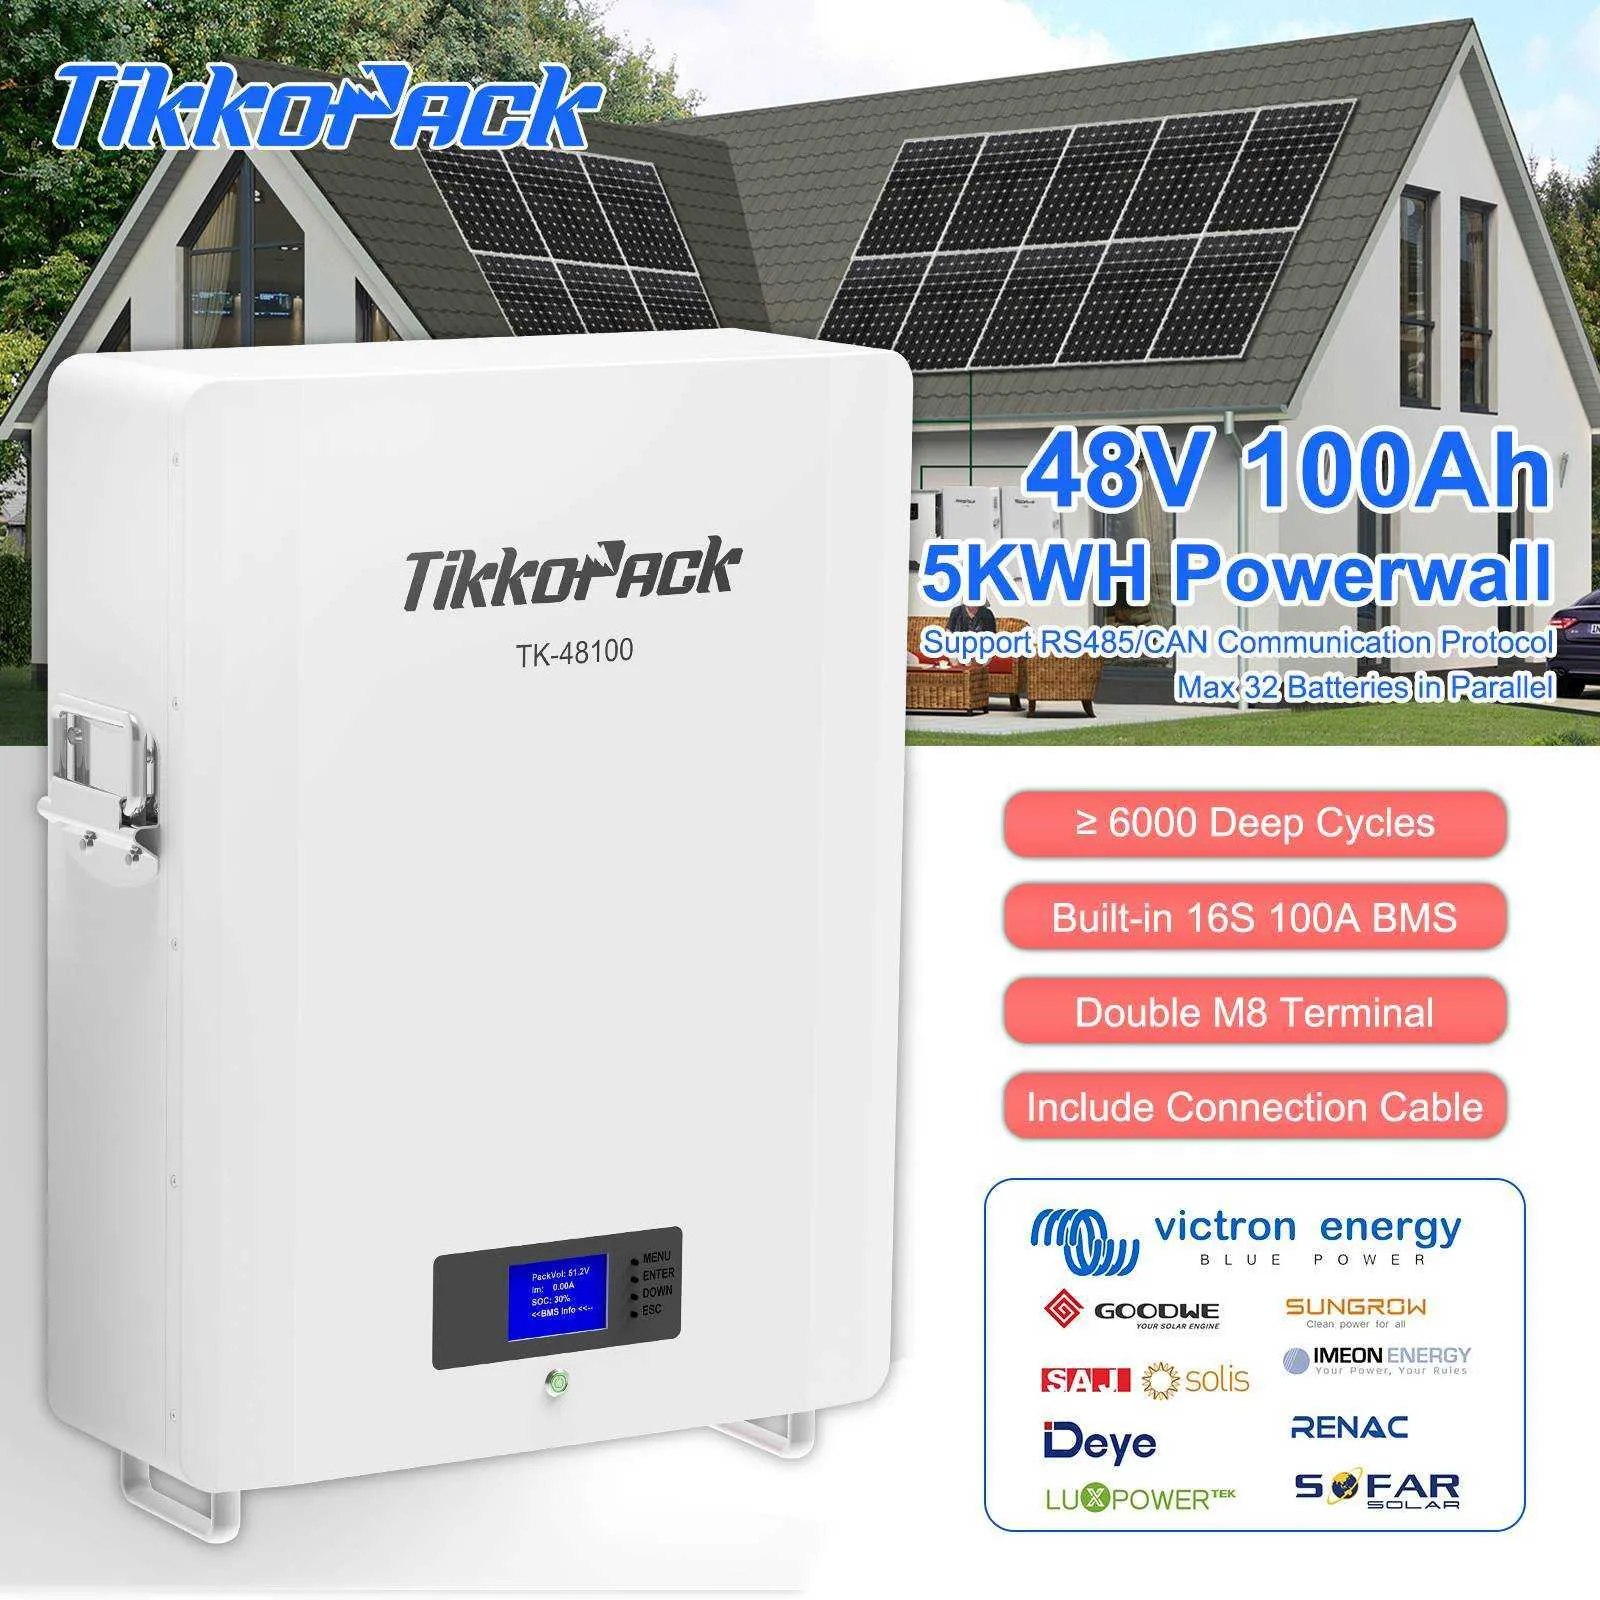 Tikkopack 48V 100AH Powerwall 5KWH LifePO4バッテリーパック6000+サイクルRS485 CAN 16S 100A BMS 5KWソーラー10年保証